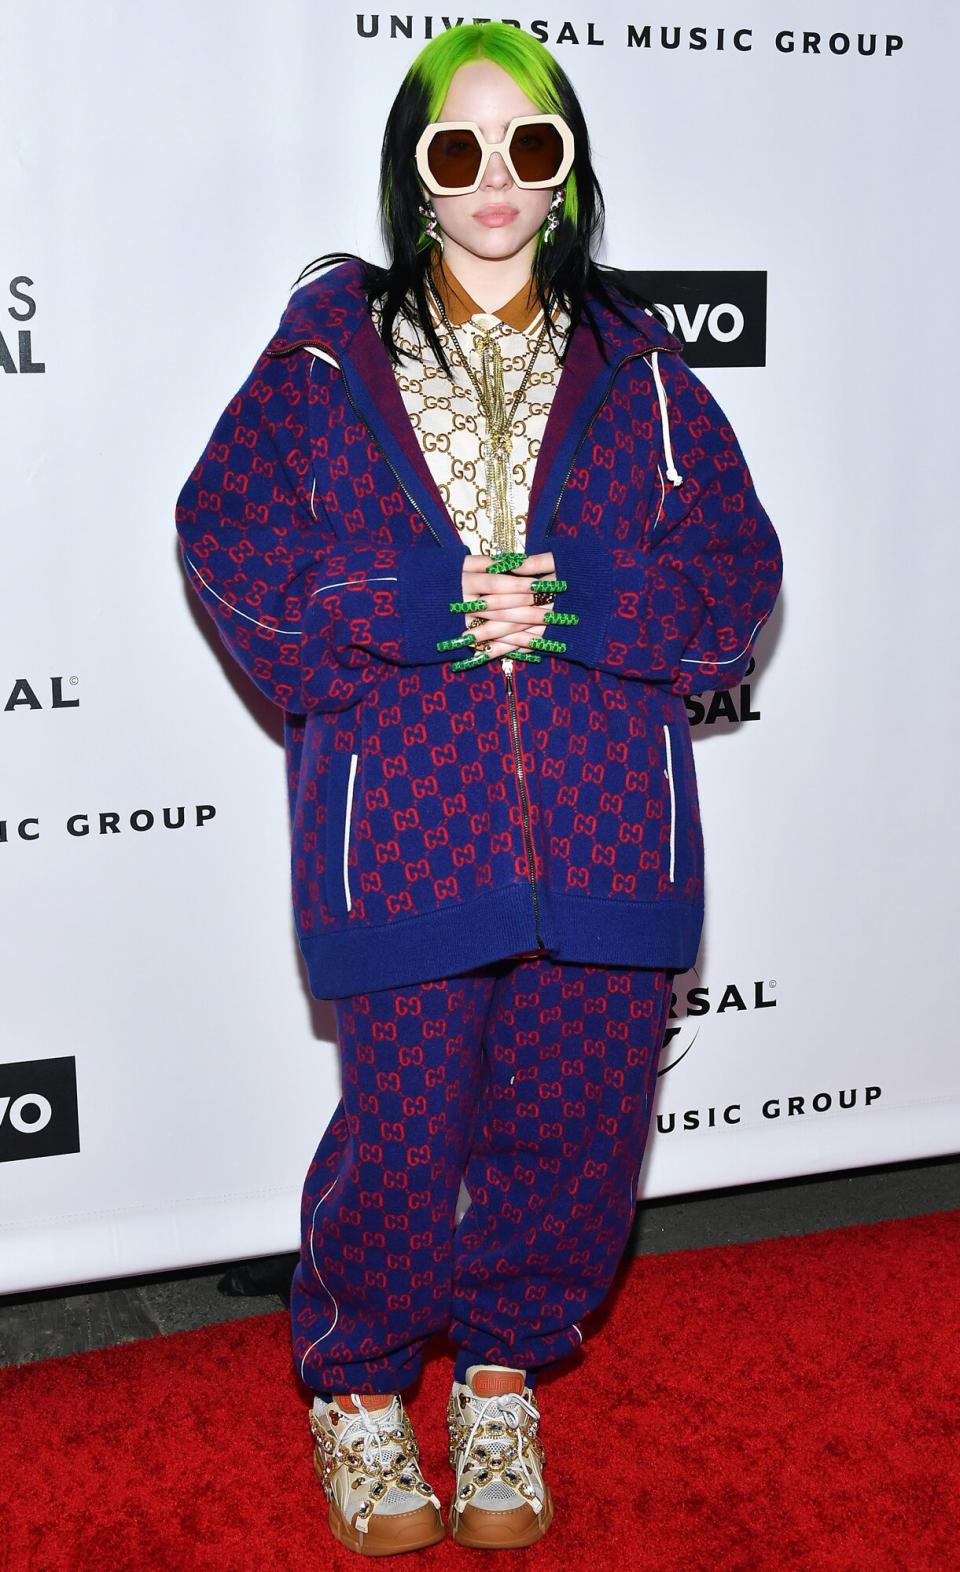 Billie Eilish attends the Universal Music Group's 2020 Grammy after party presented by Lenovo at Rolling Greens Nursery on January 26, 2020 in Los Angeles, California